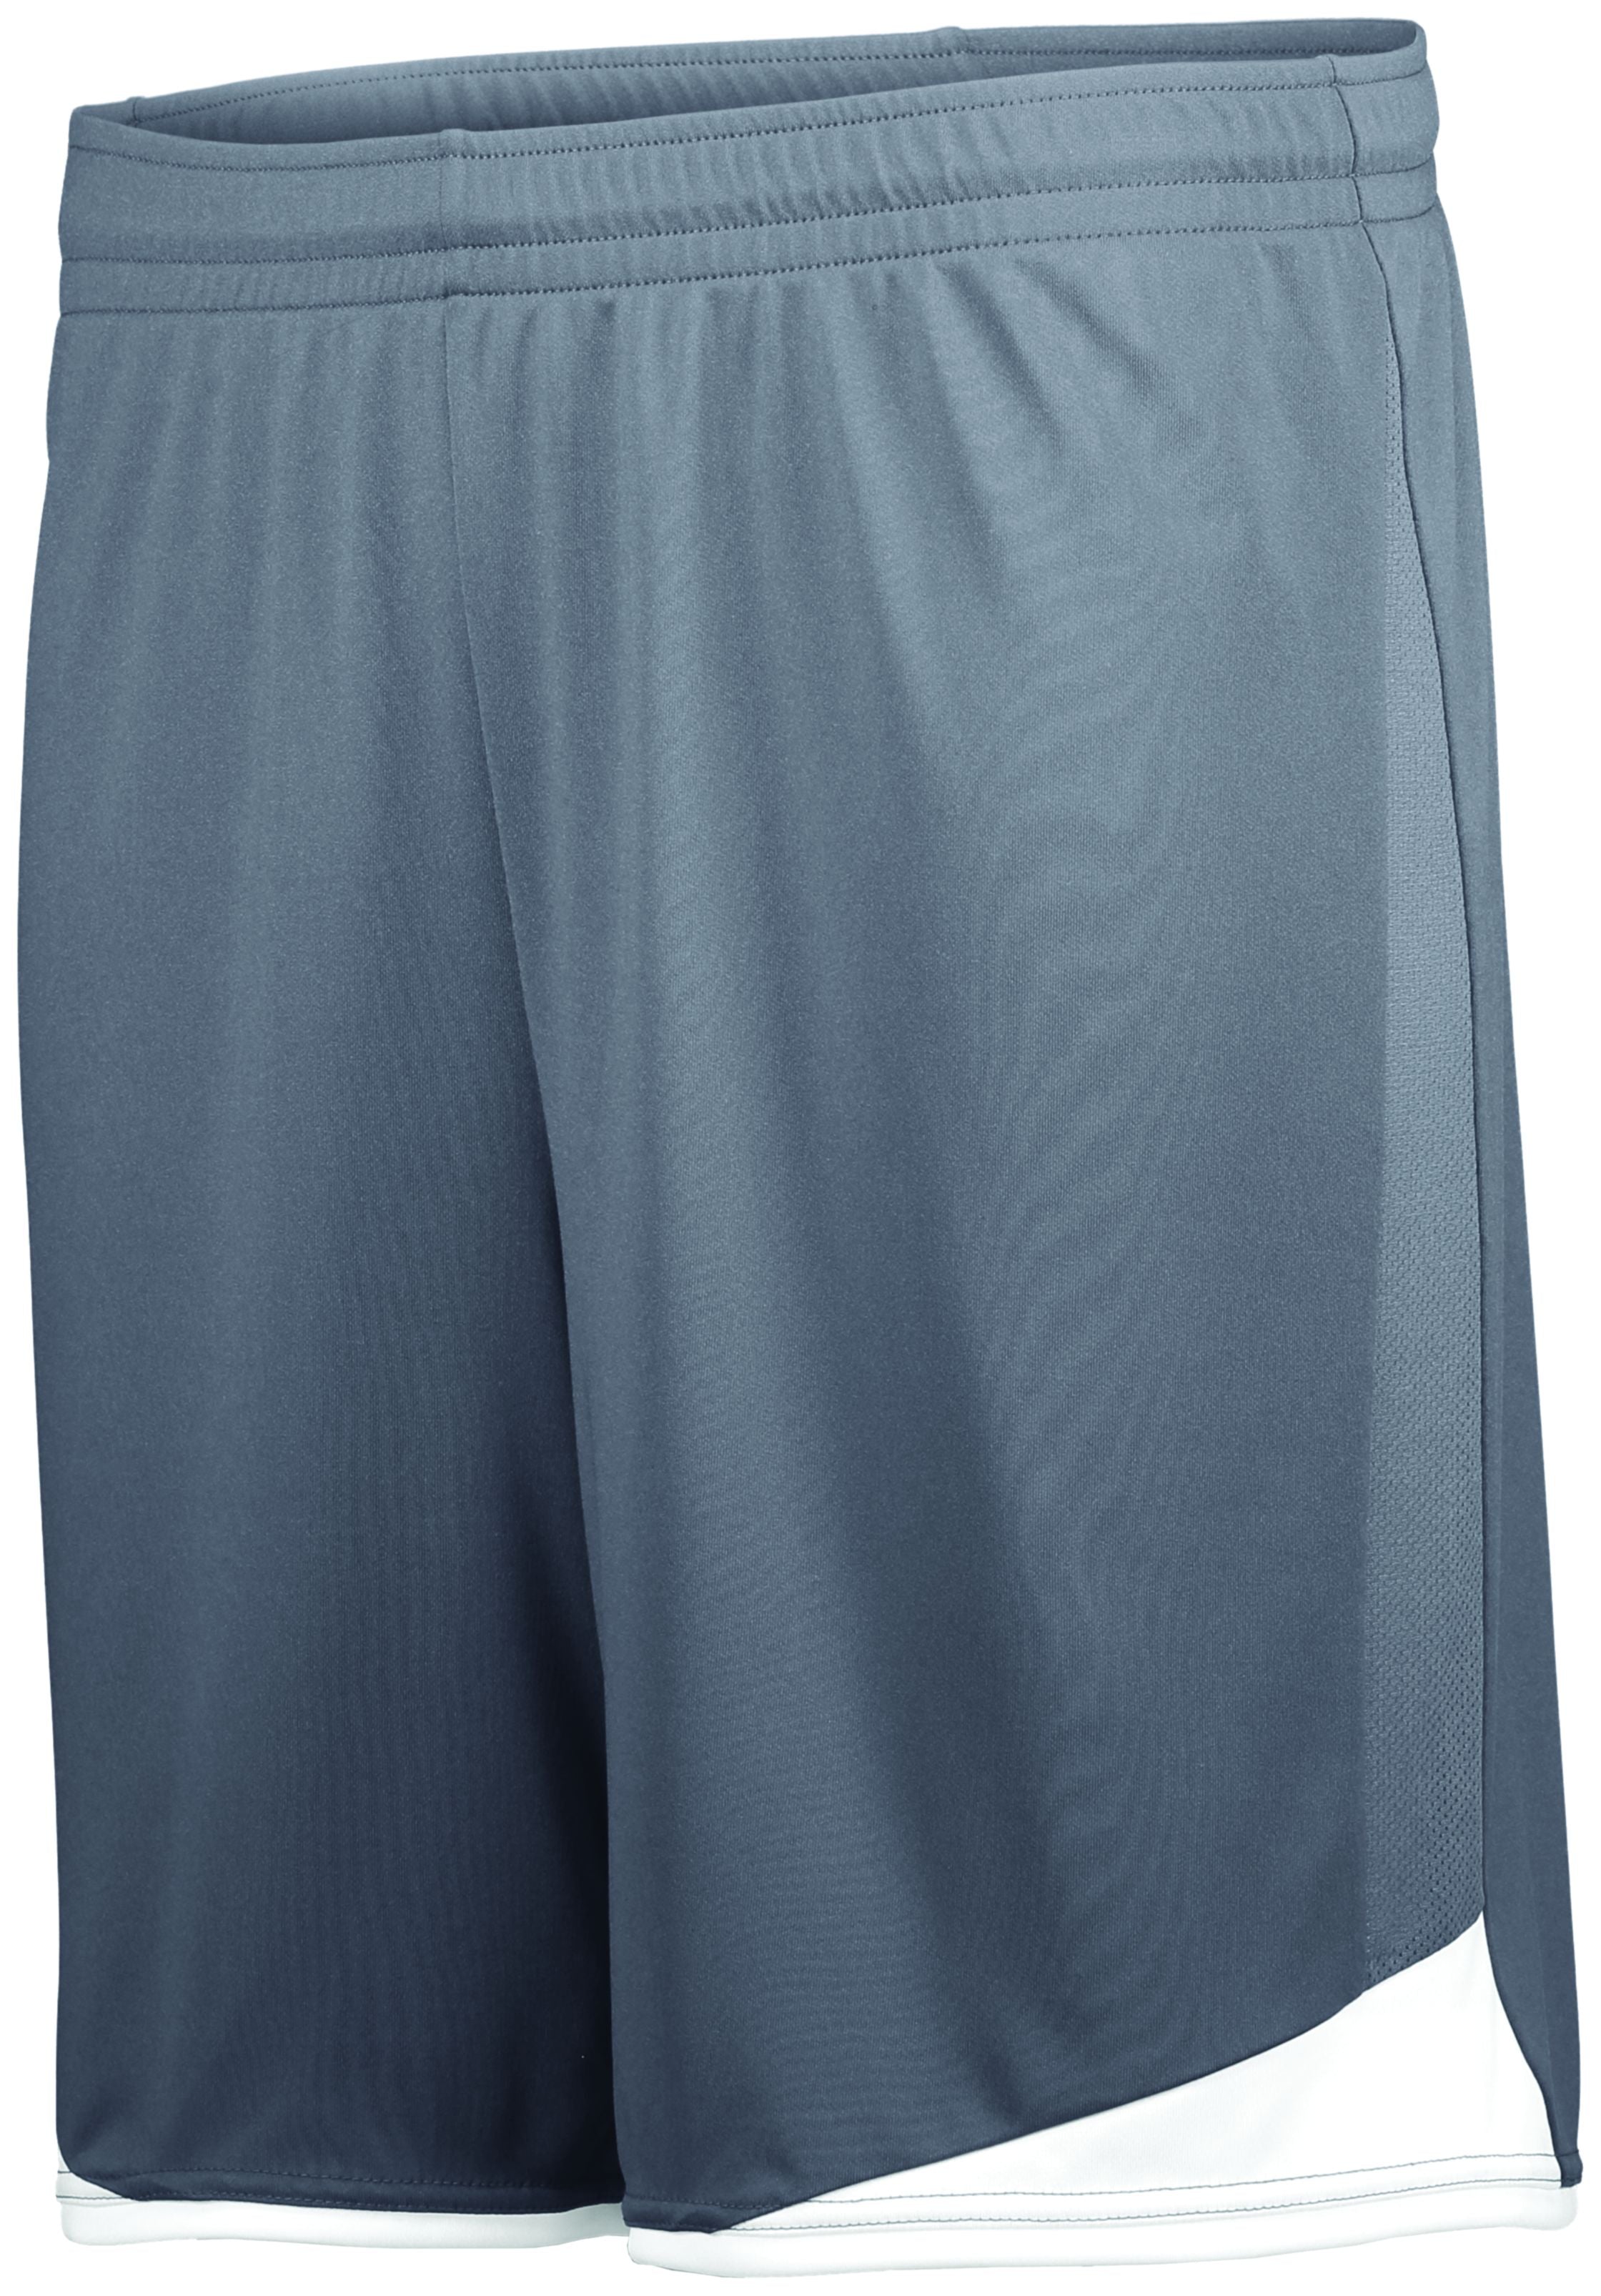 High 5 Stamford Soccer Shorts in Graphite/White  -Part of the Adult, Adult-Shorts, High5-Products, Soccer, All-Sports-1 product lines at KanaleyCreations.com